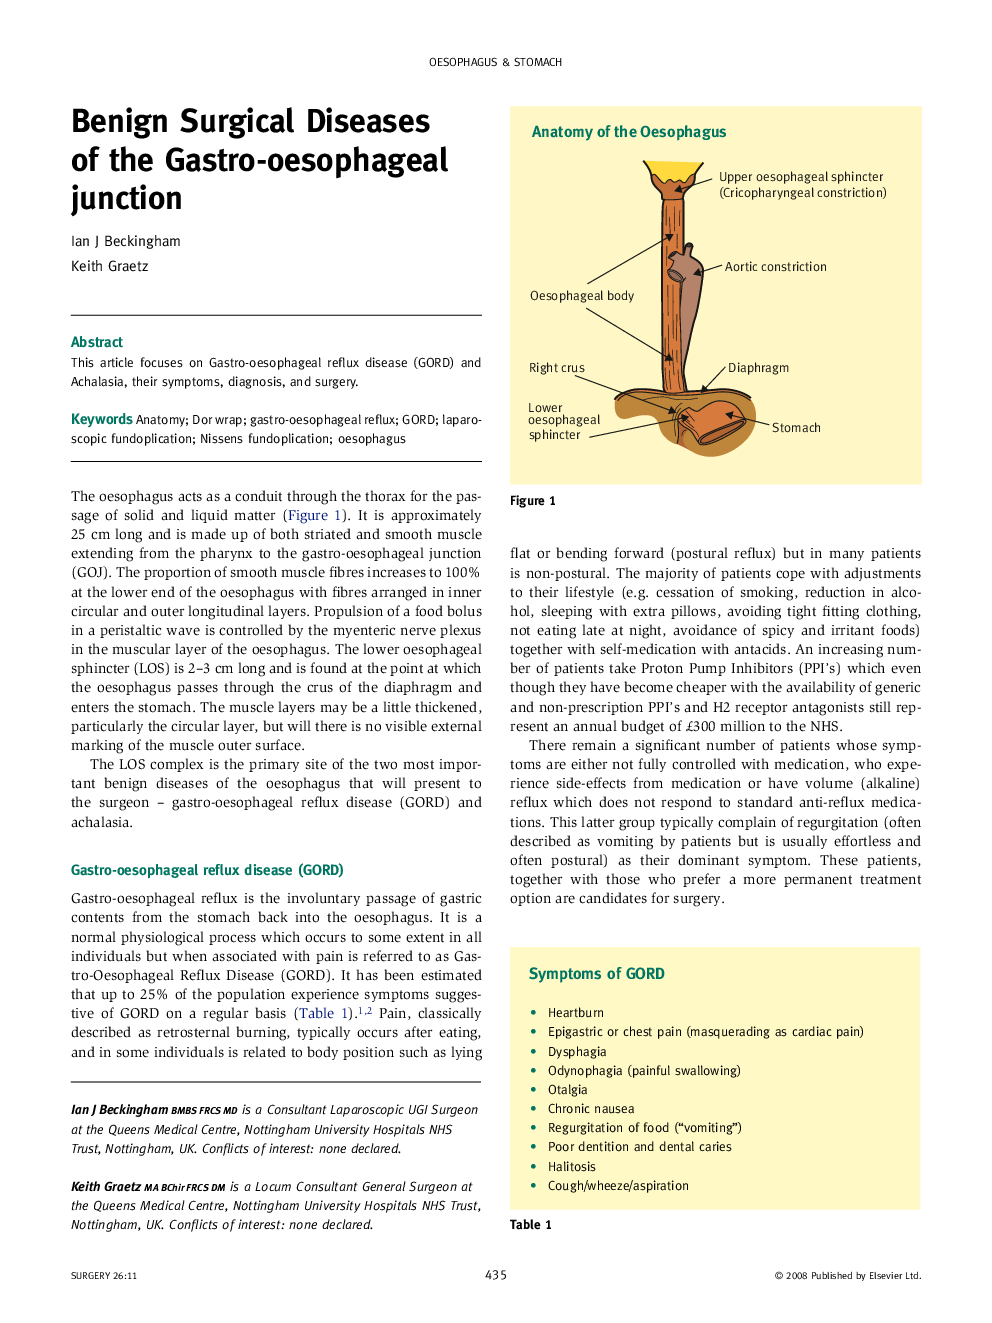 Benign Surgical Diseases of the Gastro-oesophageal junction